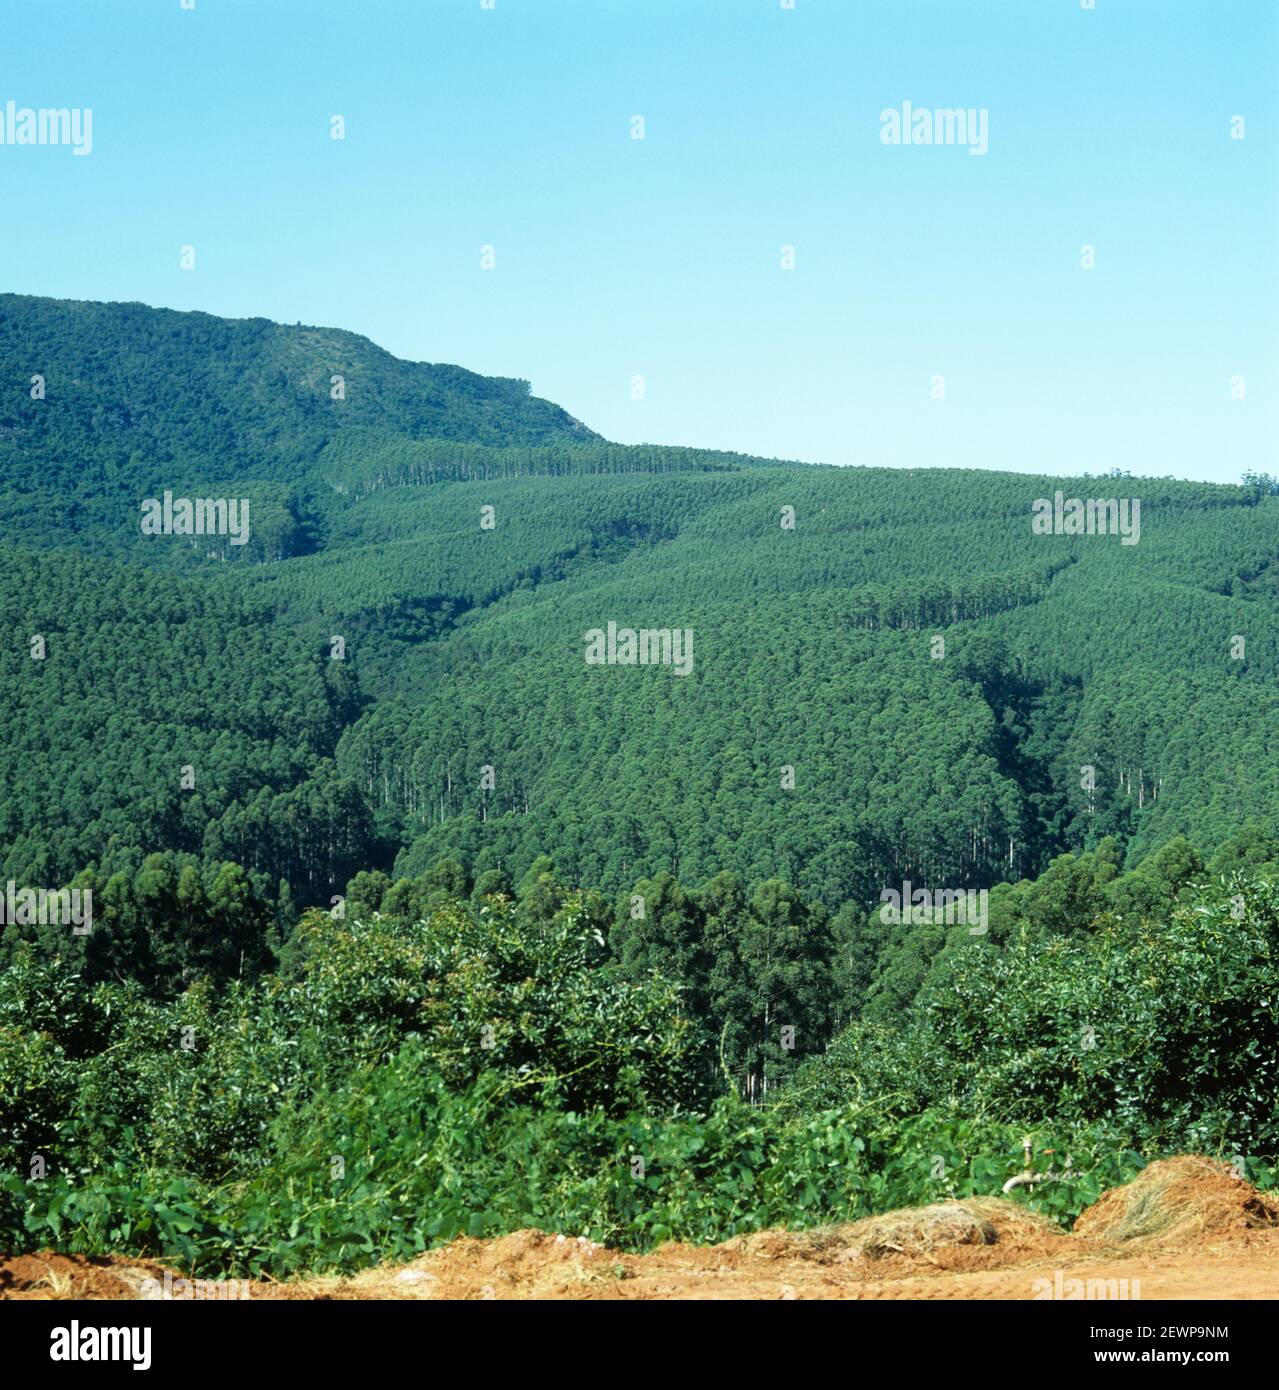 Extensive rose gum or flooded gum tree (Eucalyptus grandis) plantation covering hillside and replacing natural habitat, Transvaal, South Africa Stock Photo